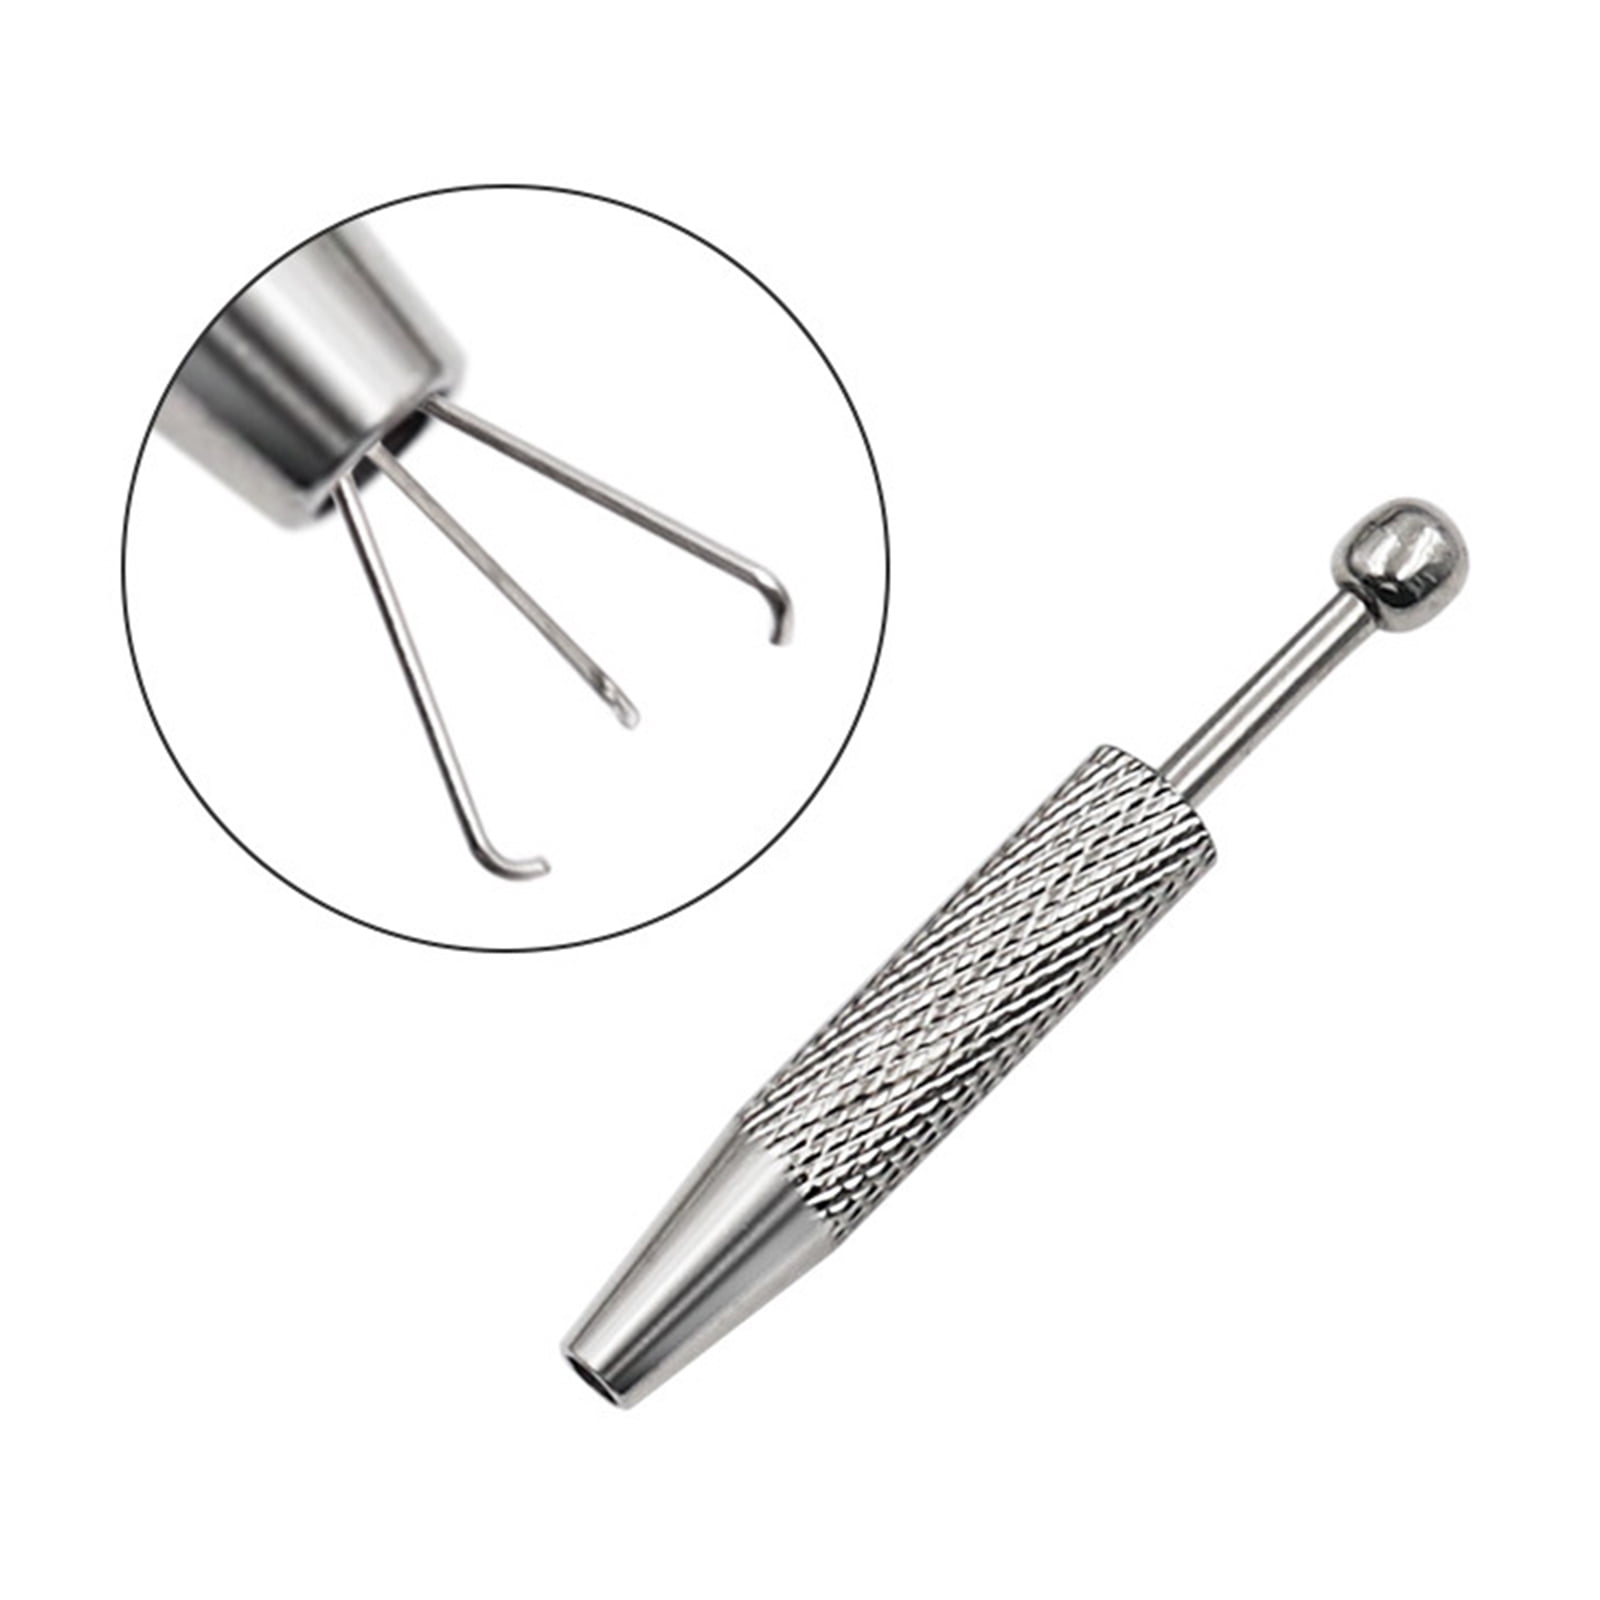 Mudder Piercing Ball Grabber Tool Pick Up Tool with 4 Prongs